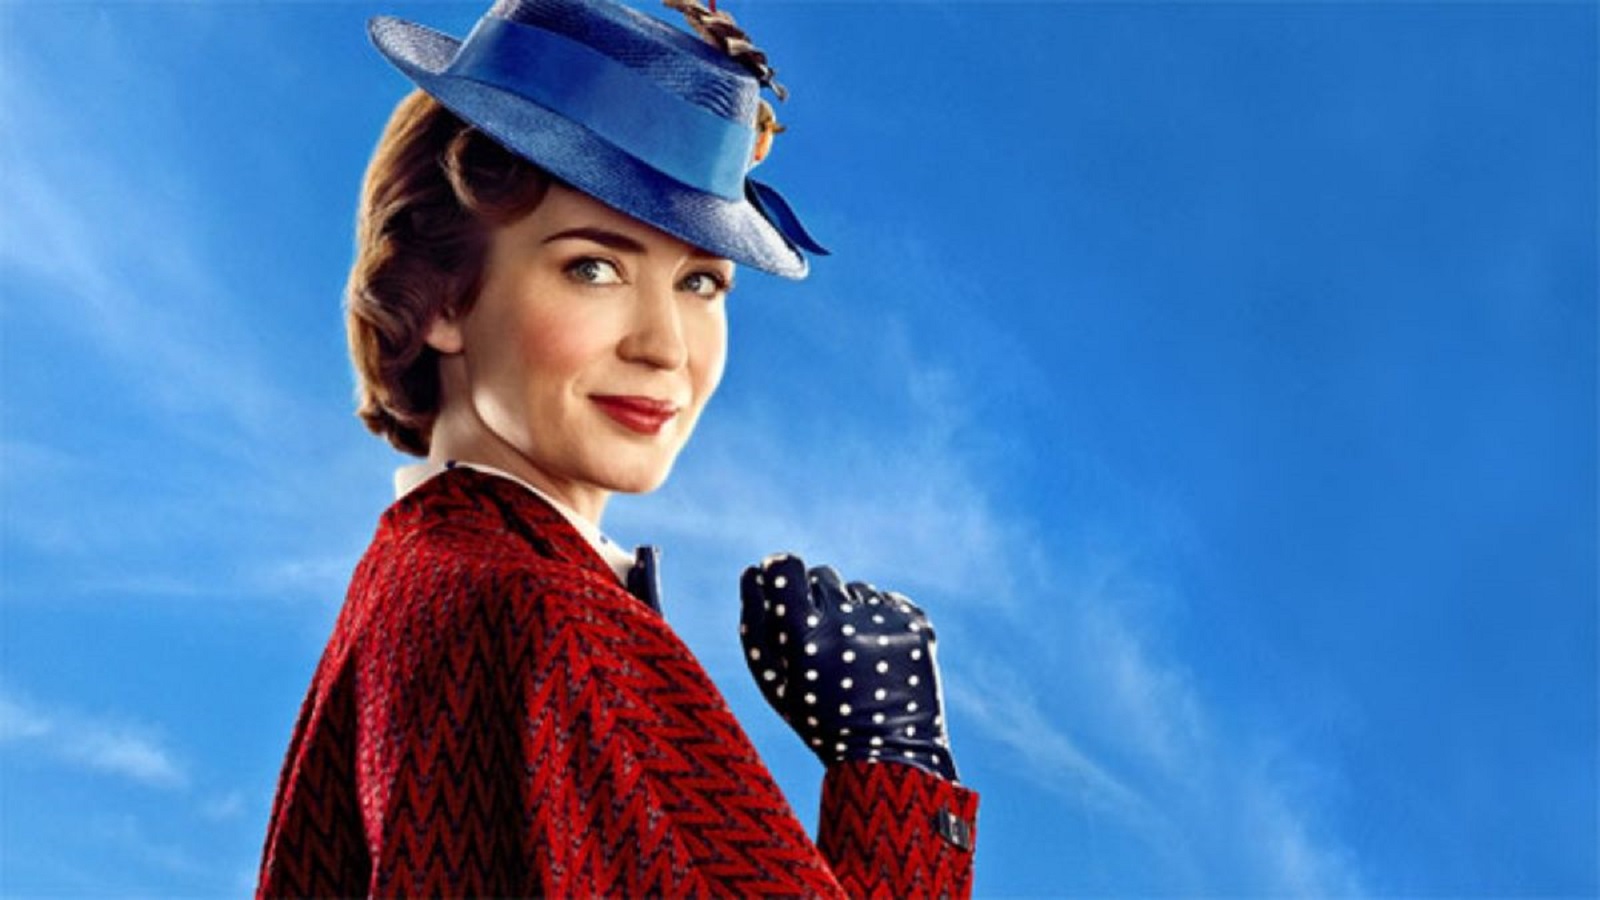 Mary Poppins 3 should feature fight for gay rights, director says